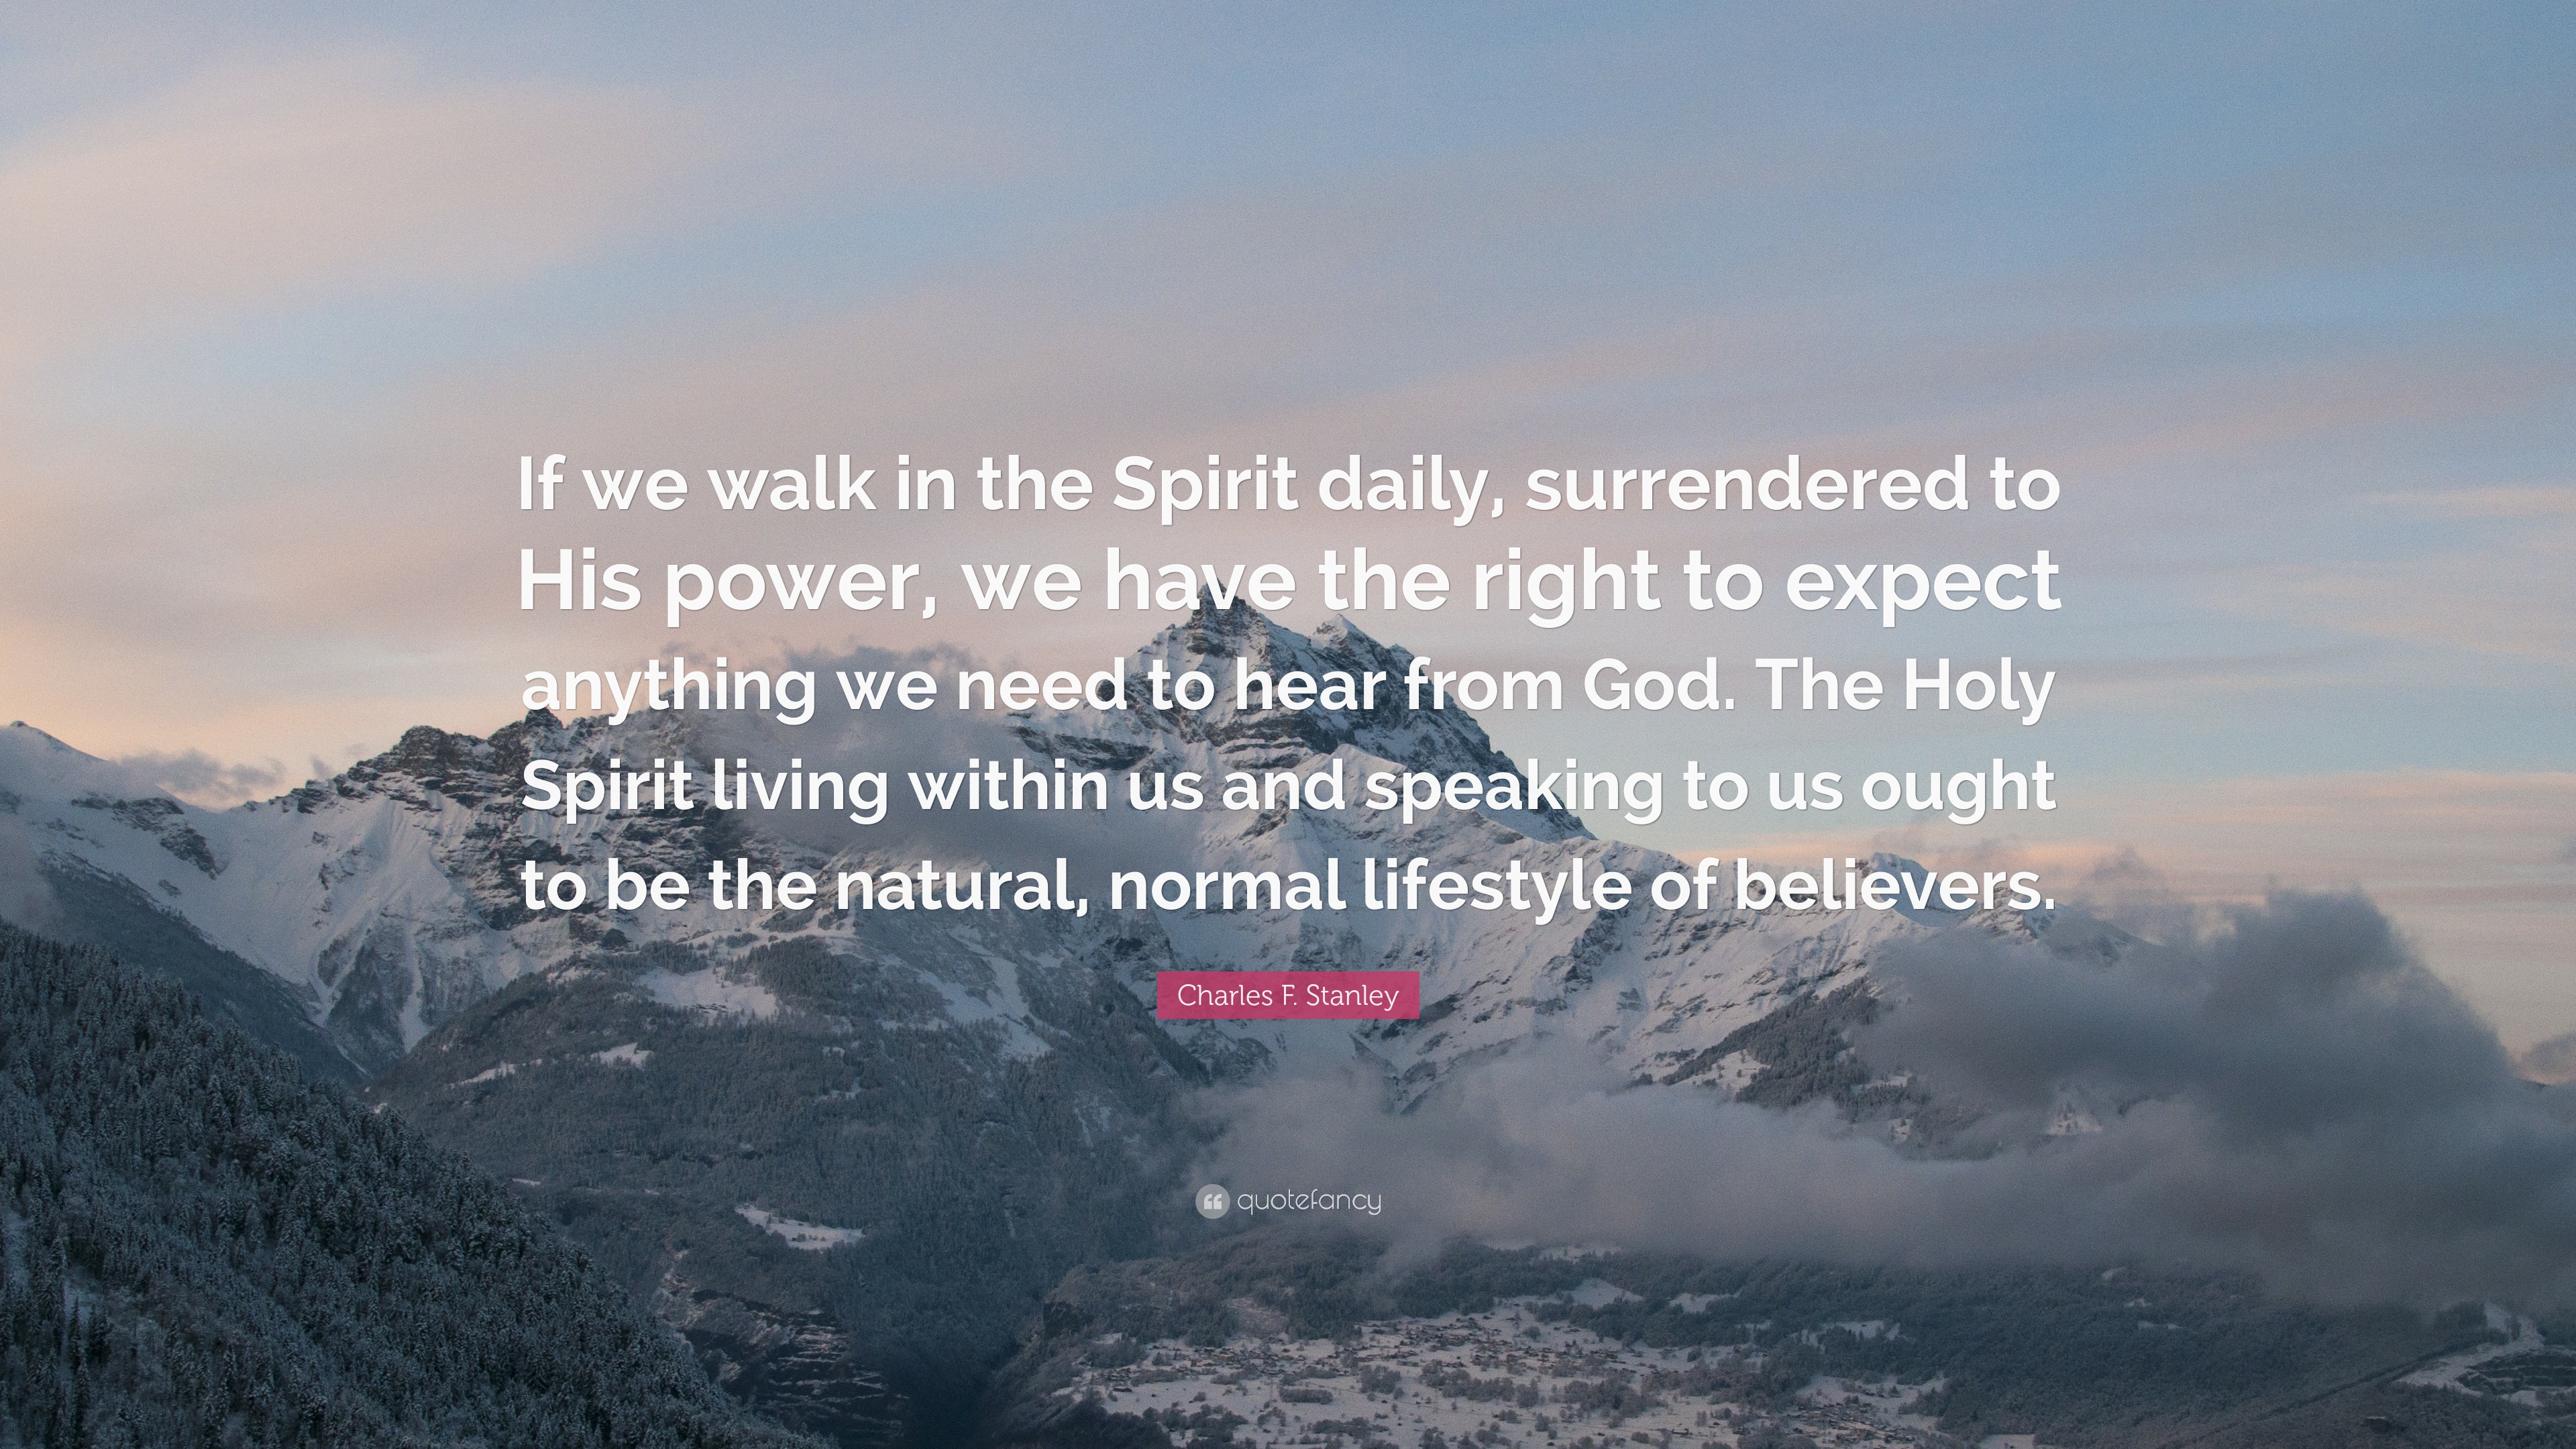 Charles F. Stanley Quote: “If we walk in the Spirit daily